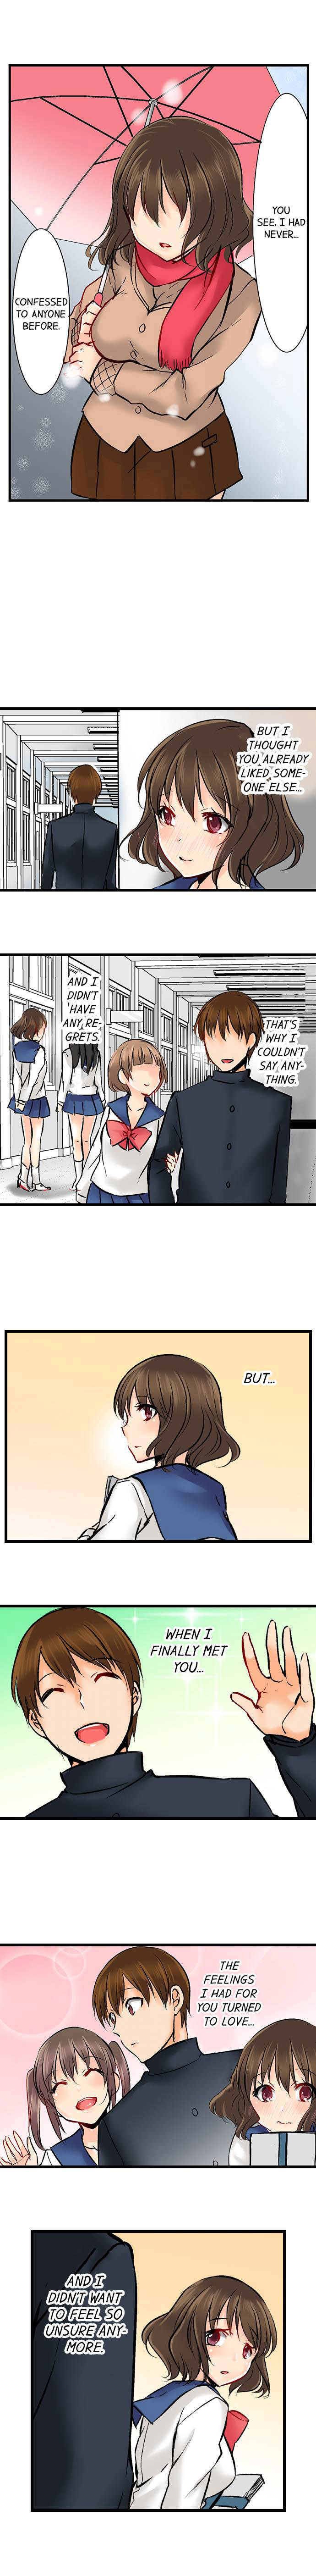 Touching My Older Sister Under the Table - Chapter 37 Page 6